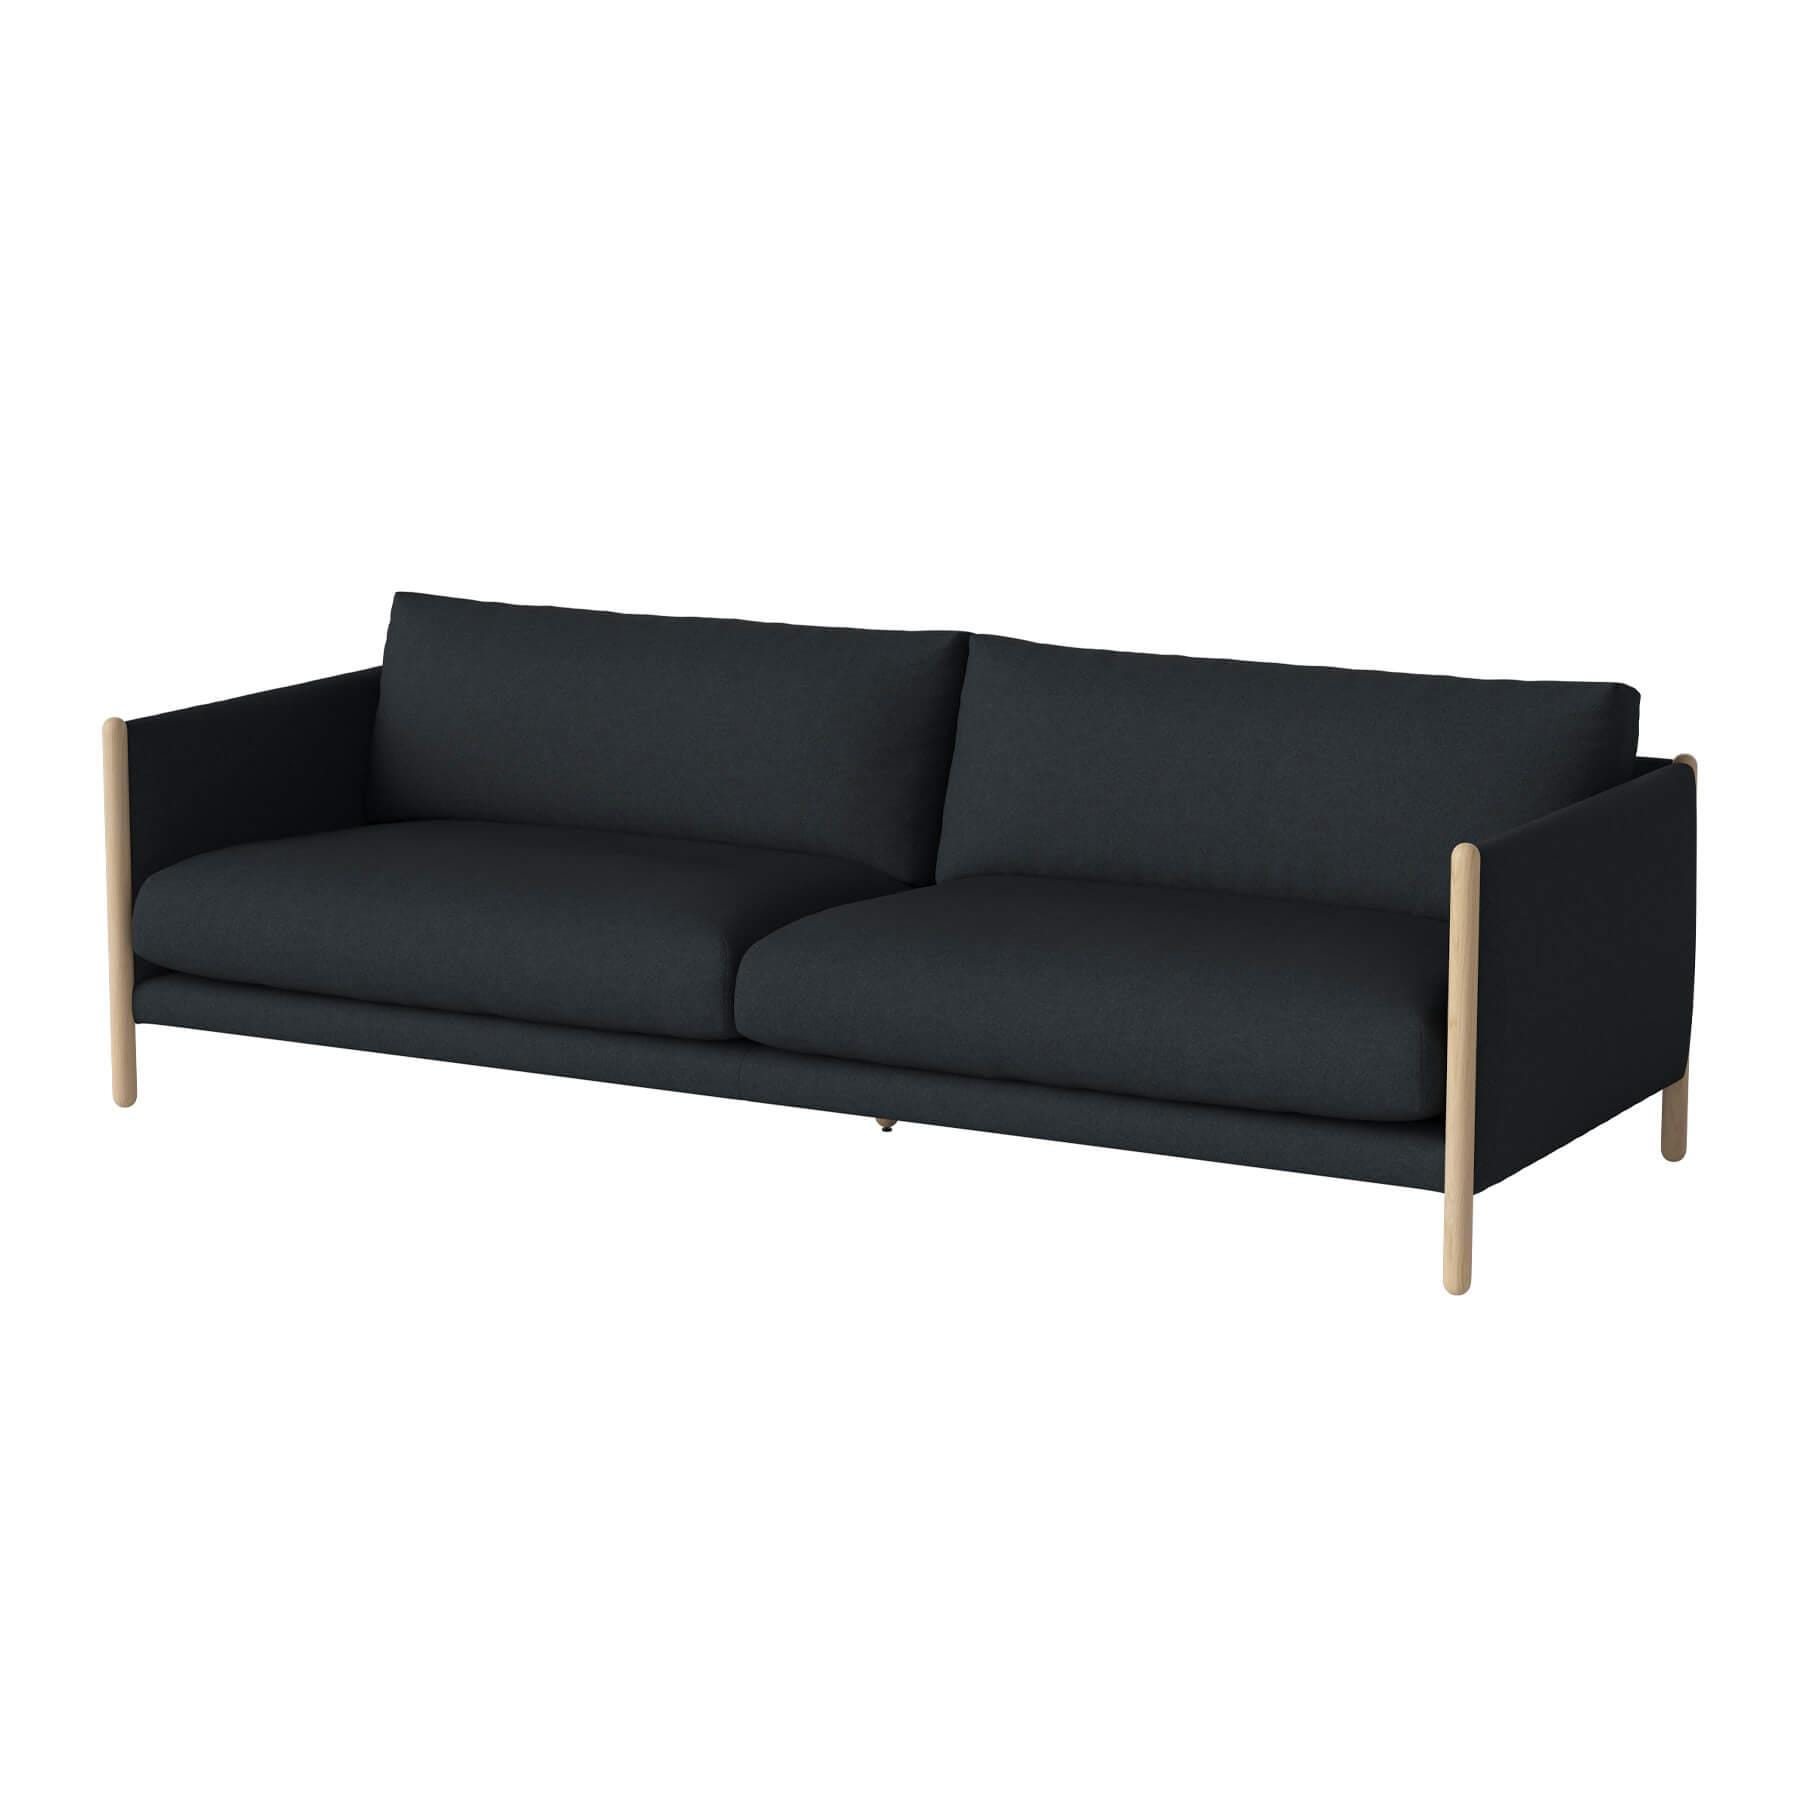 Bolia Hayden Sofa 3 Seater Sofa White Oiled Oak Qual Navy Blue Designer Furniture From Holloways Of Ludlow